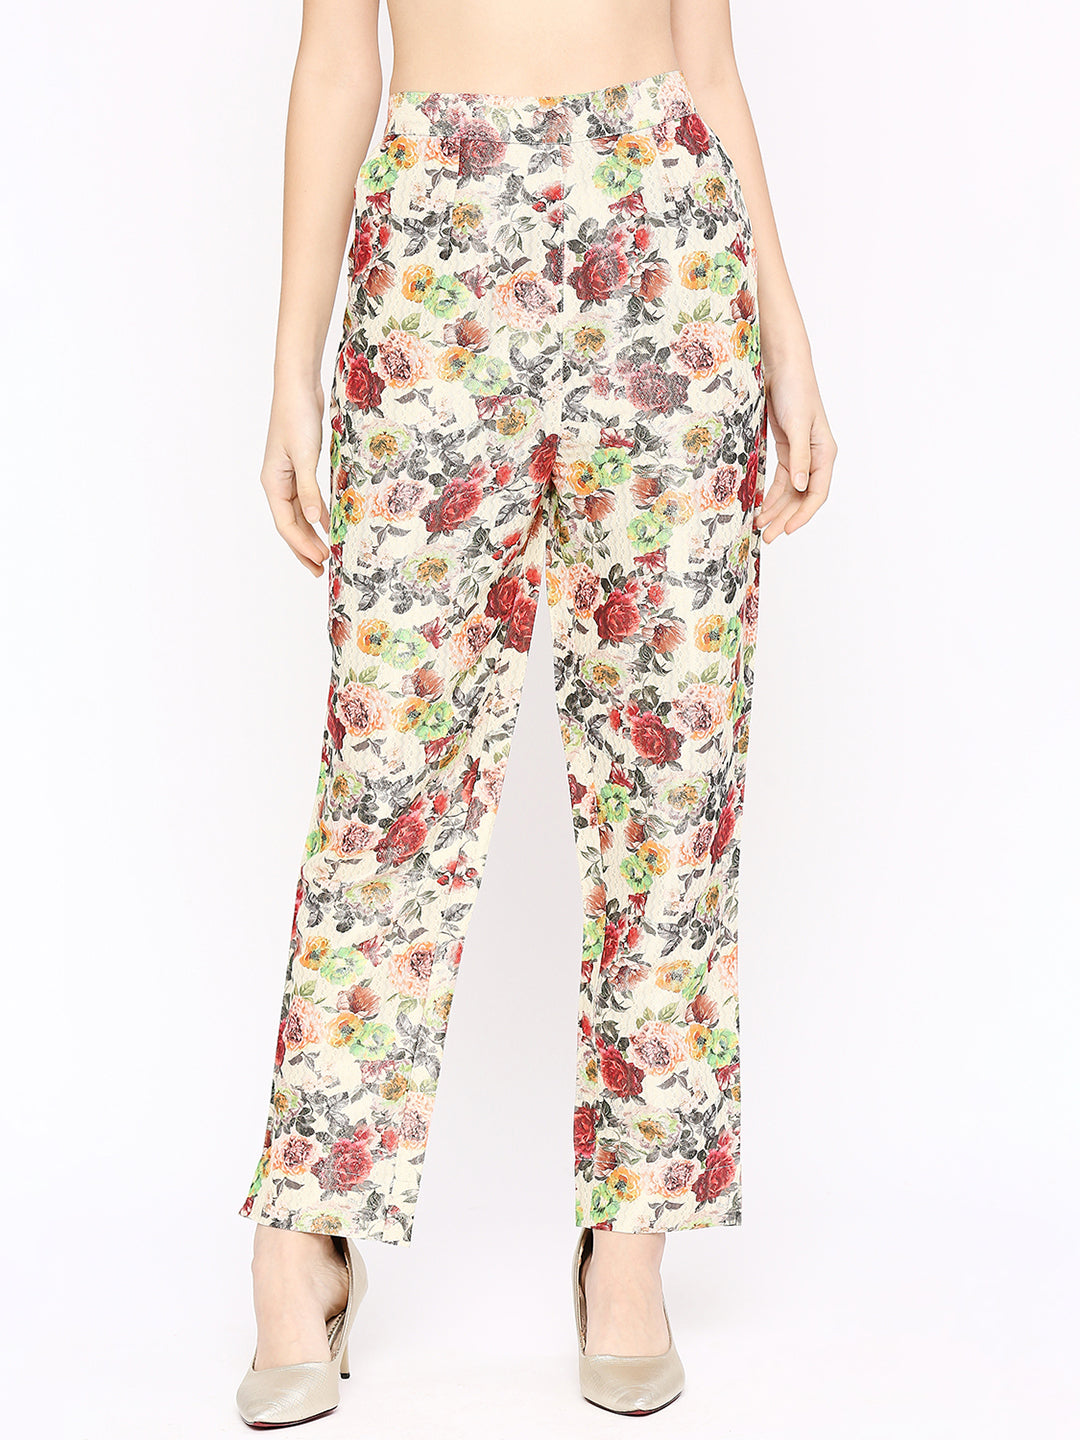 Off White Multicolored Floral Printed Co-Ord Set with Brocade Pant